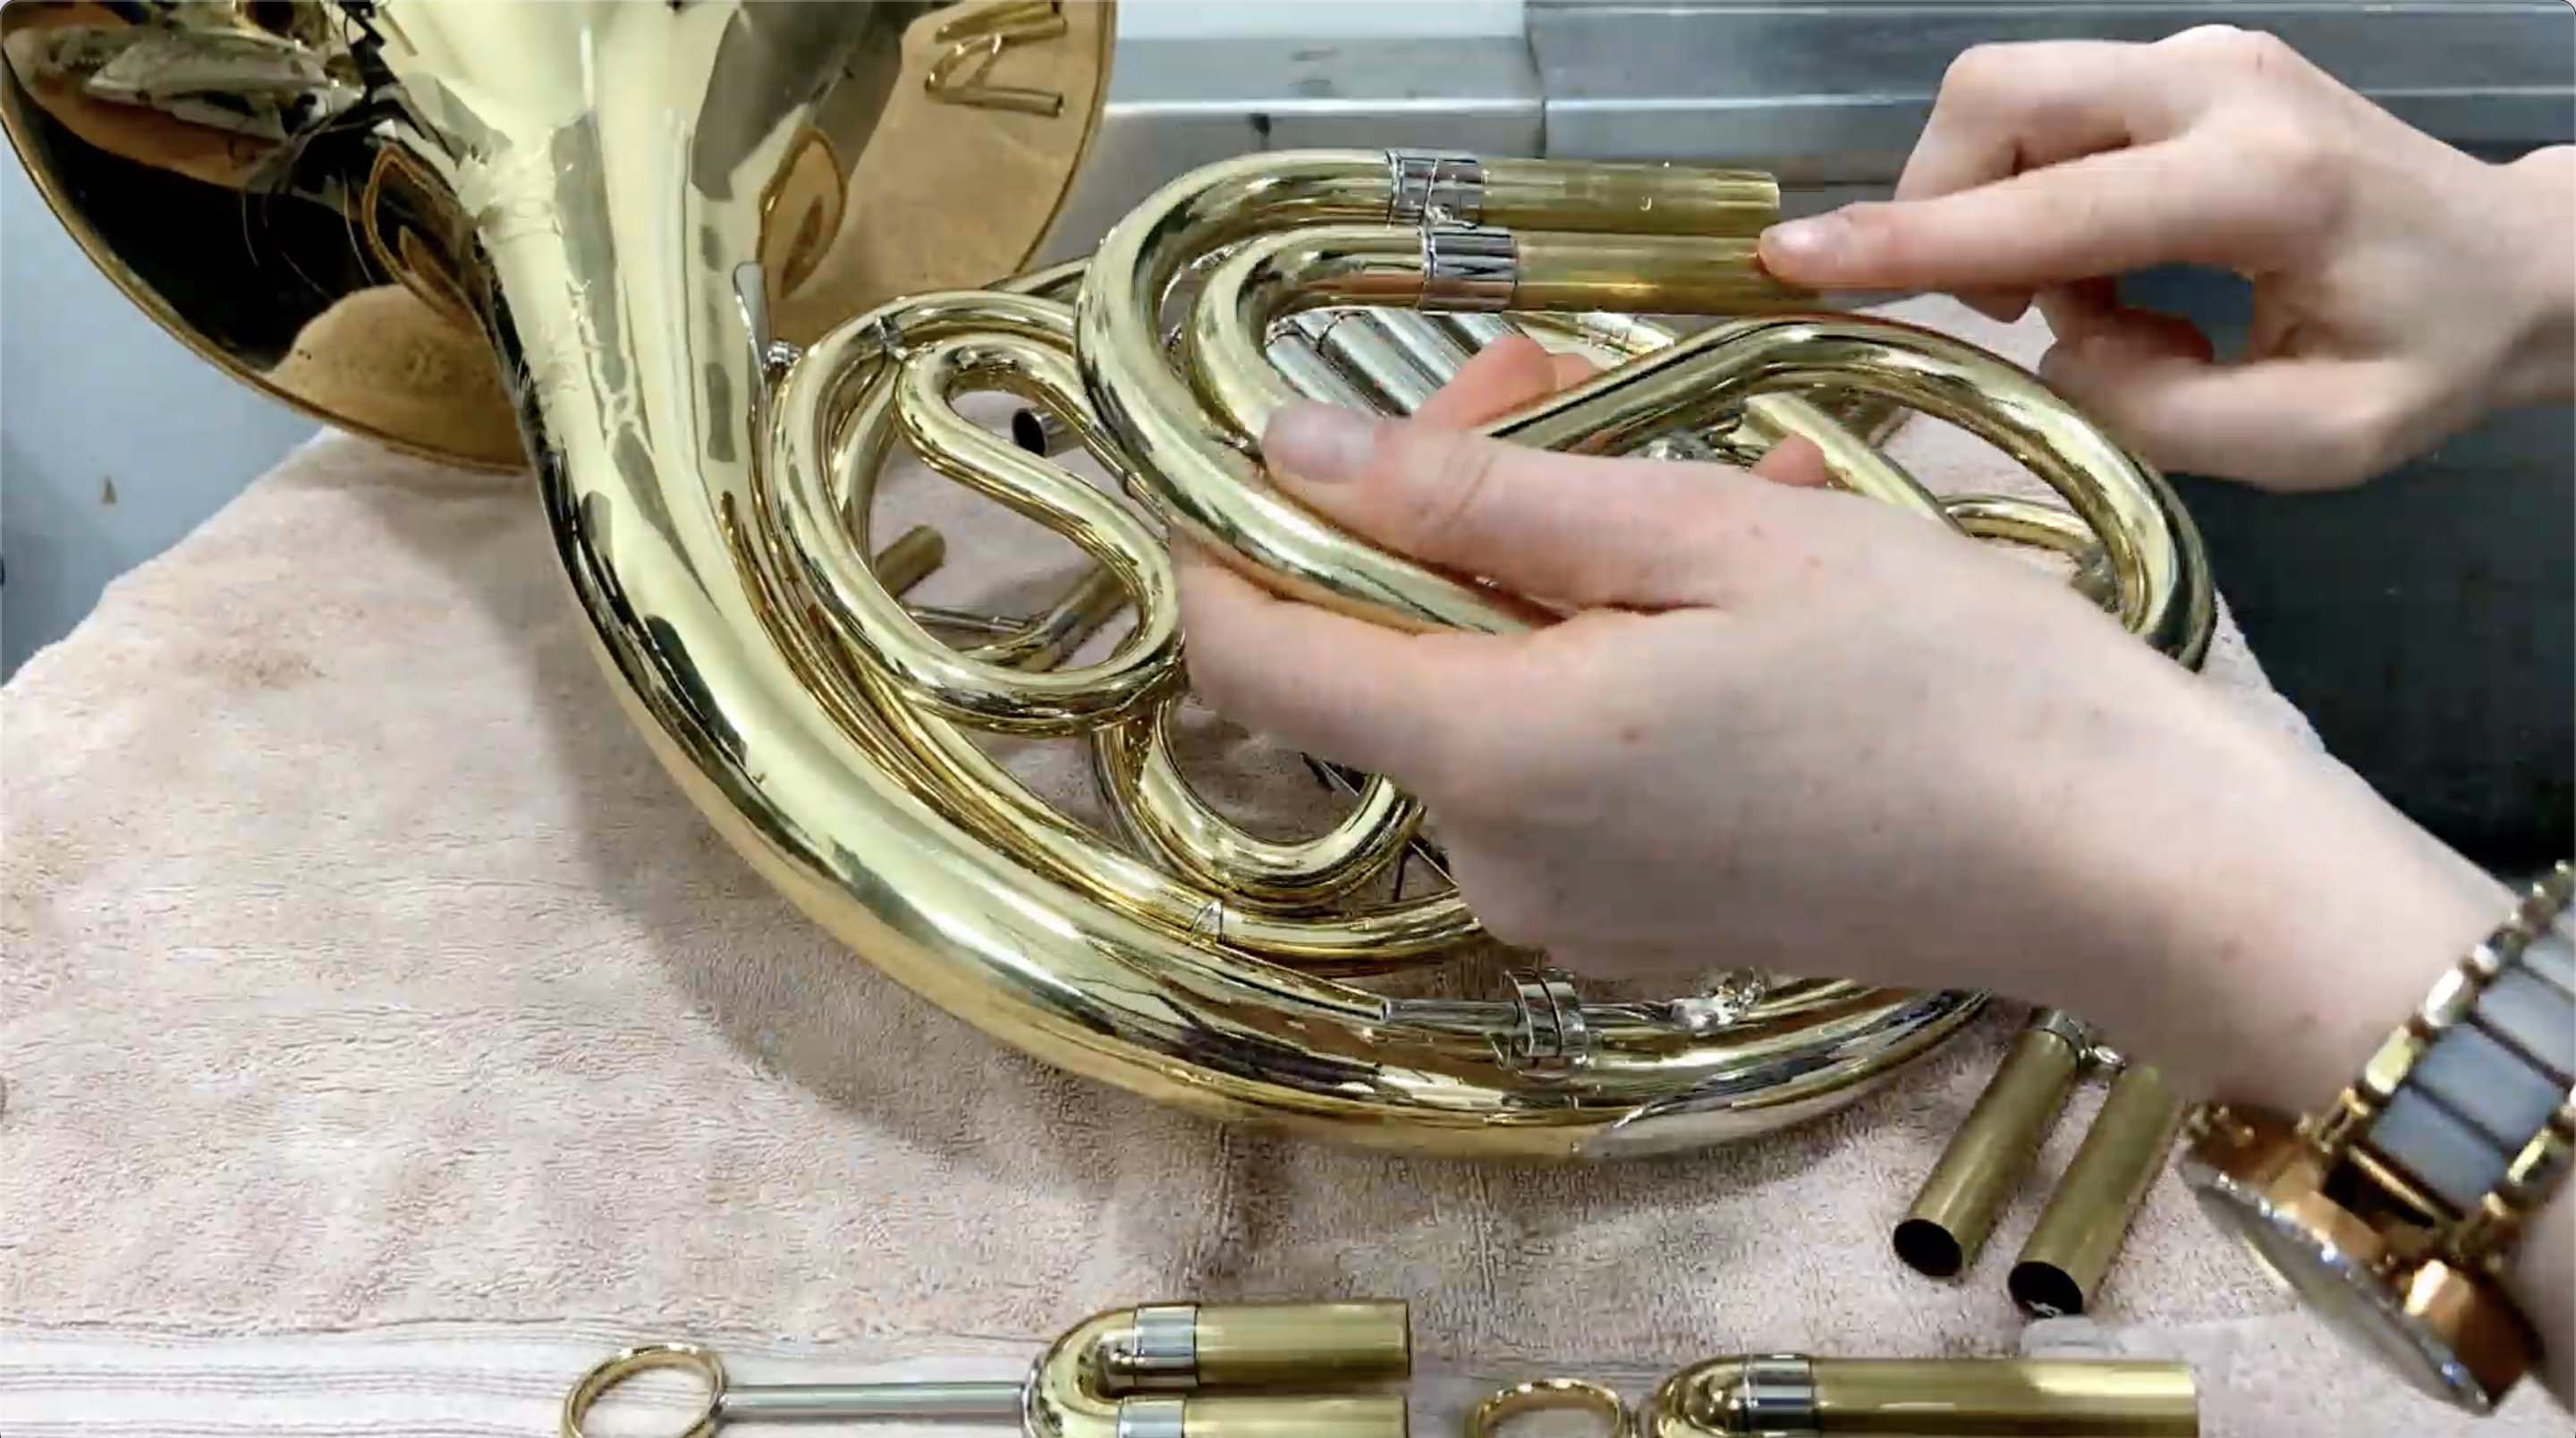 Greece is being applied to one of the French horn slides.